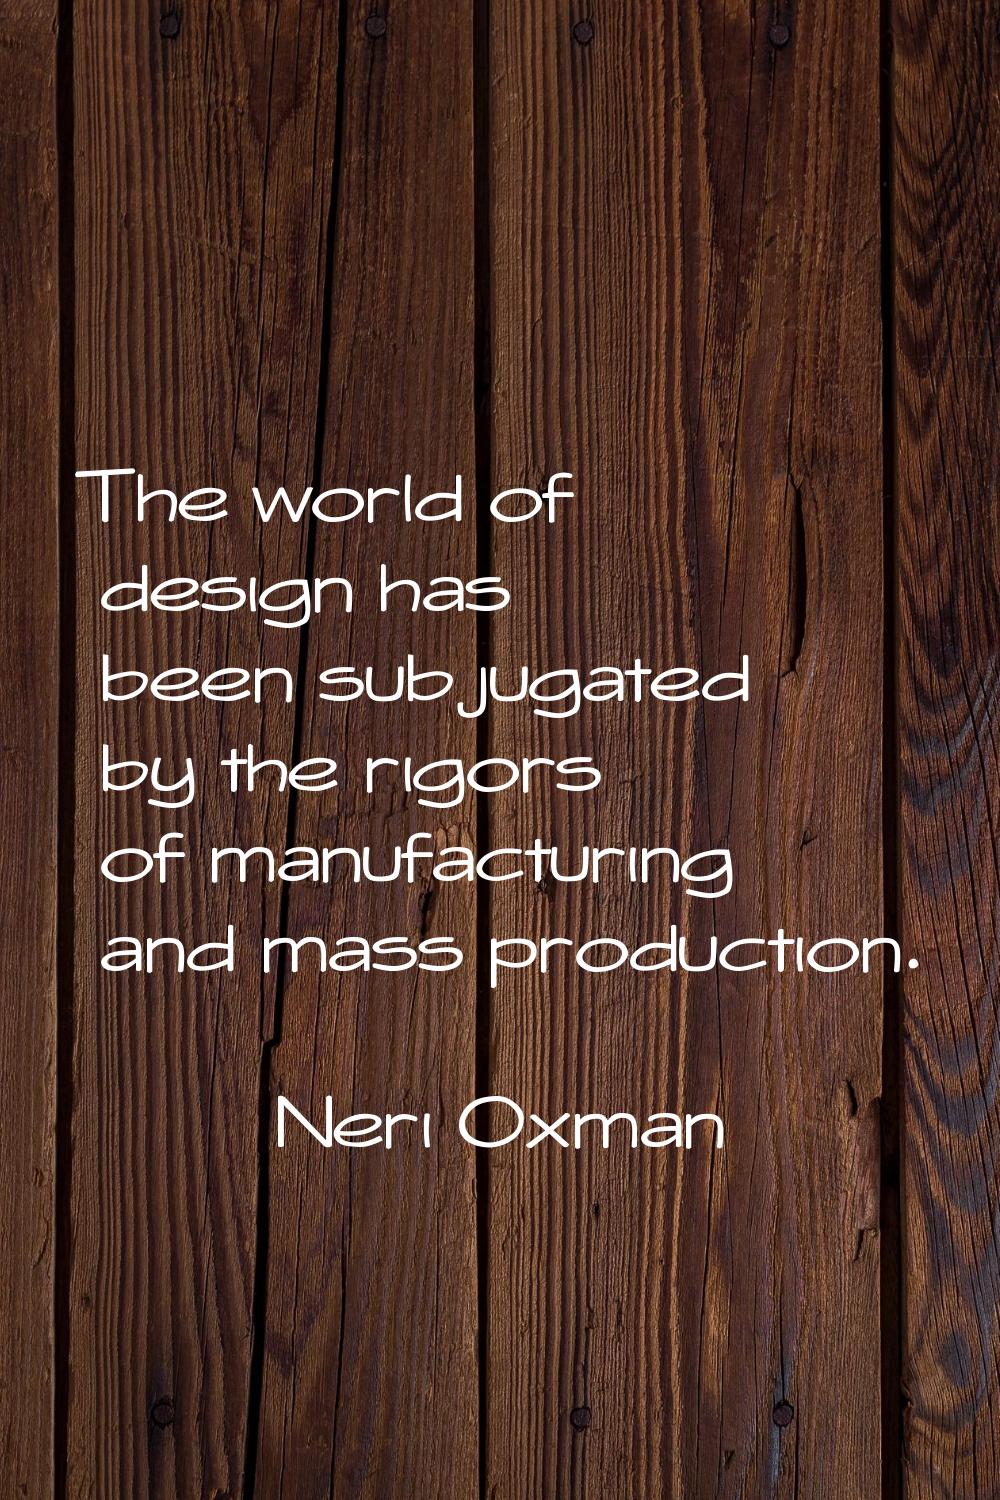 The world of design has been subjugated by the rigors of manufacturing and mass production.